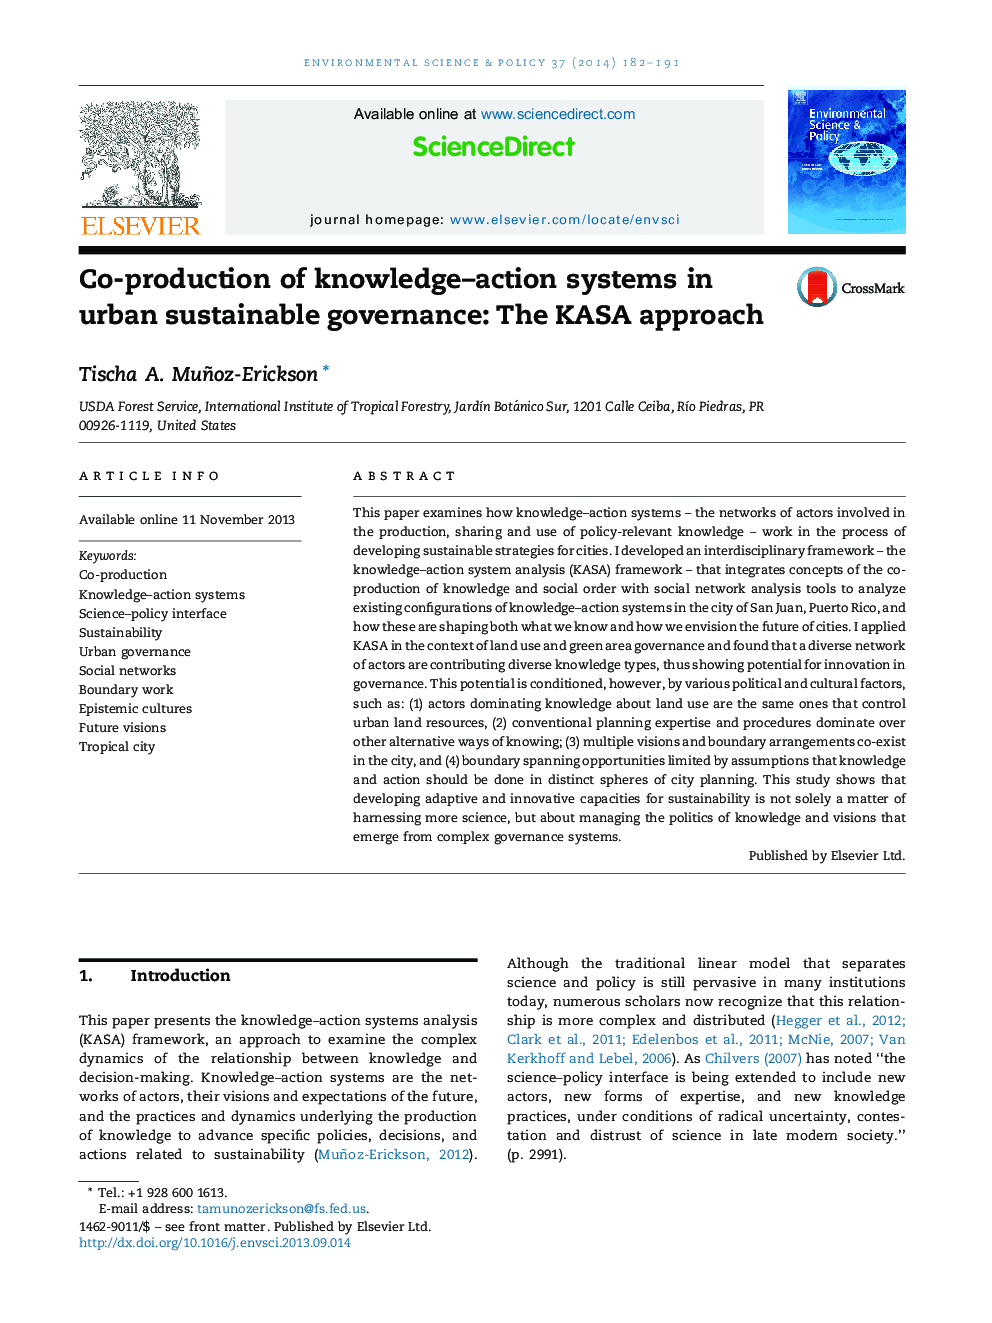 Co-production of knowledge-action systems in urban sustainable governance: The KASA approach